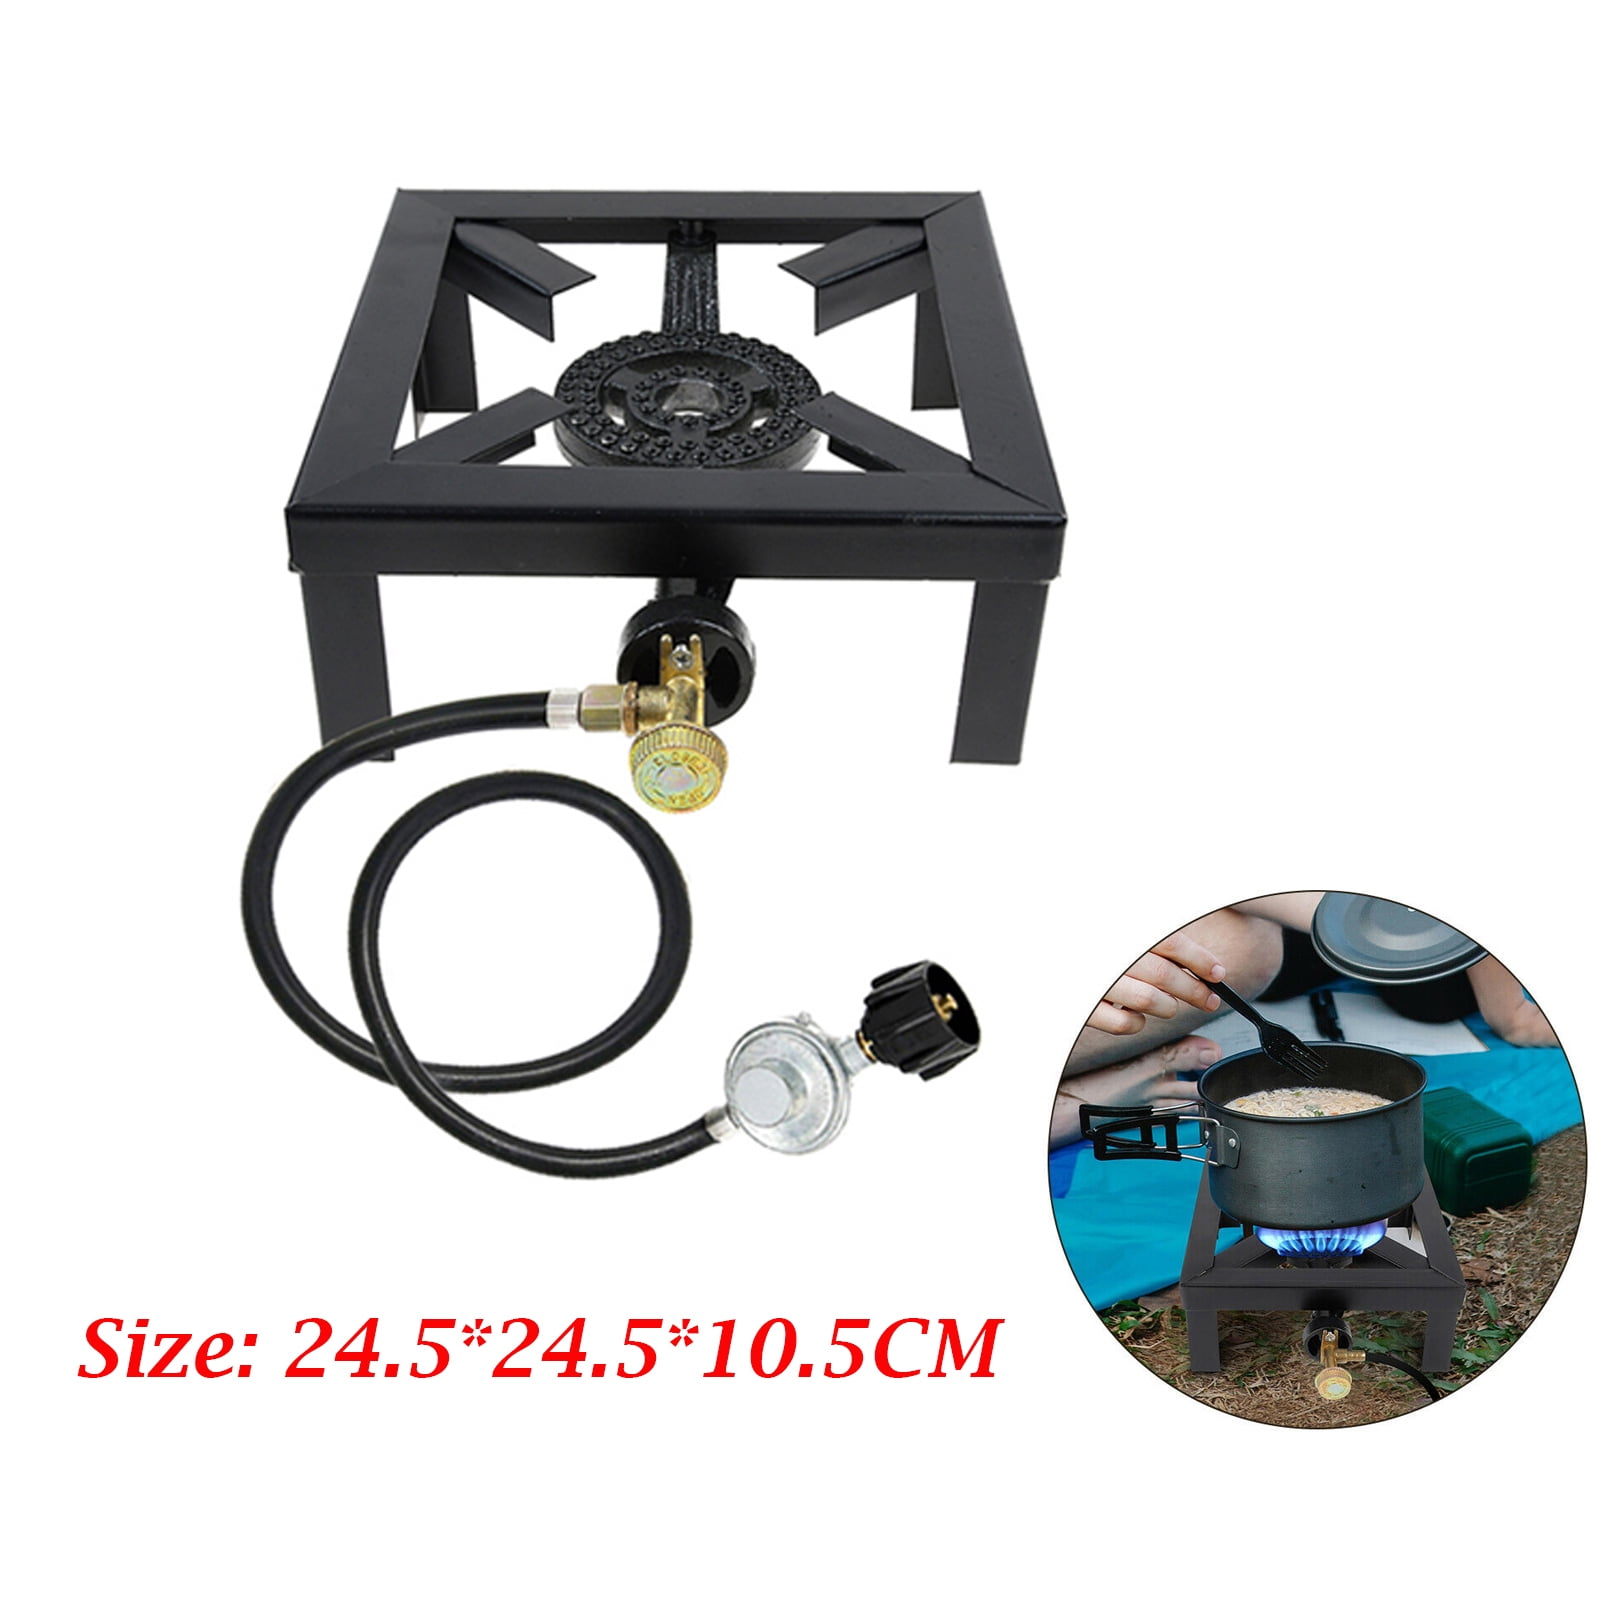 Loyalheartdy Outdoor & Indoor Gas Stove Propane Cooker Portable Double  Burner Adjustable Hose 8000W for Camping Barbecue